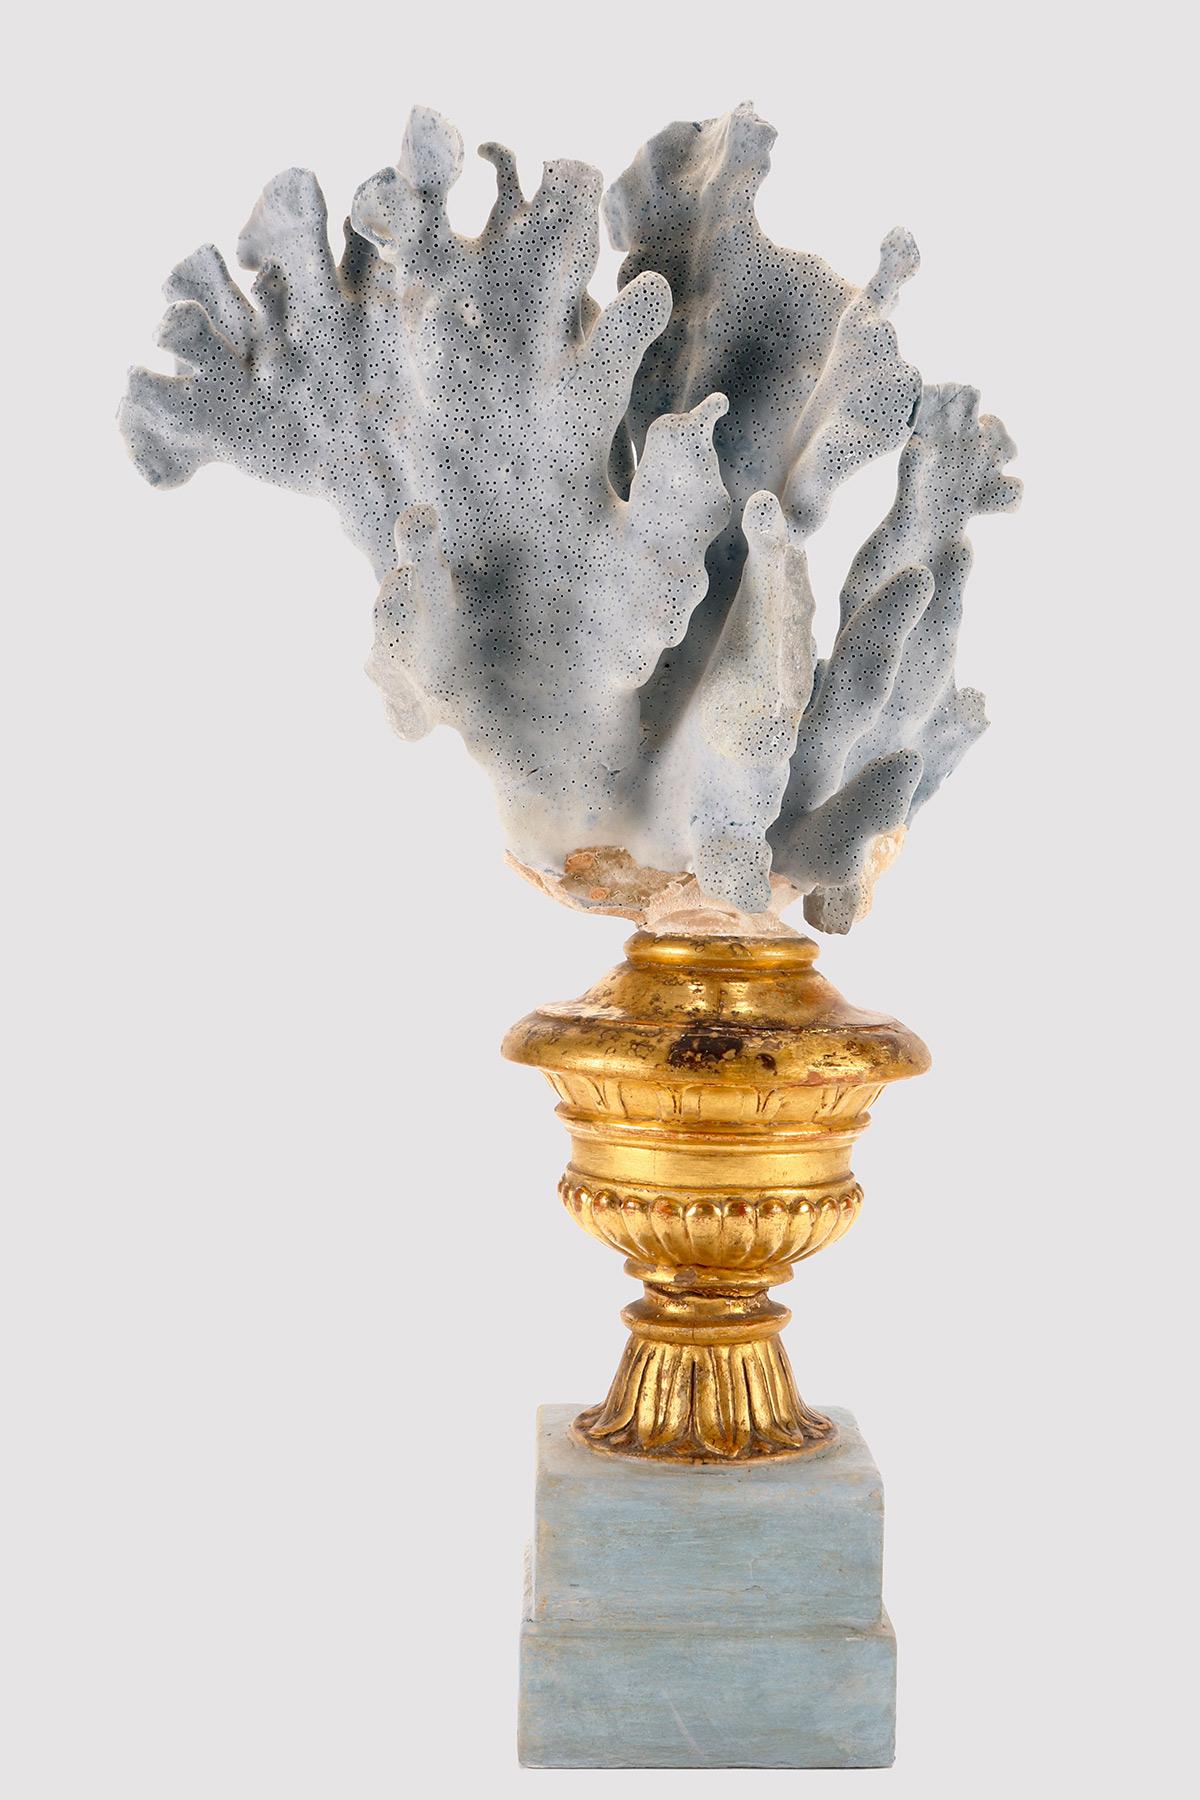 A Specimen from Wuderkammer: a branch of Blue Madrepora (Heliopora Coerulea). The Specimen is mounted on a vase-shaped wooden base with parts gilded and parts painted light blue. Italy around 1880. (SHIP TO EU ONLY)